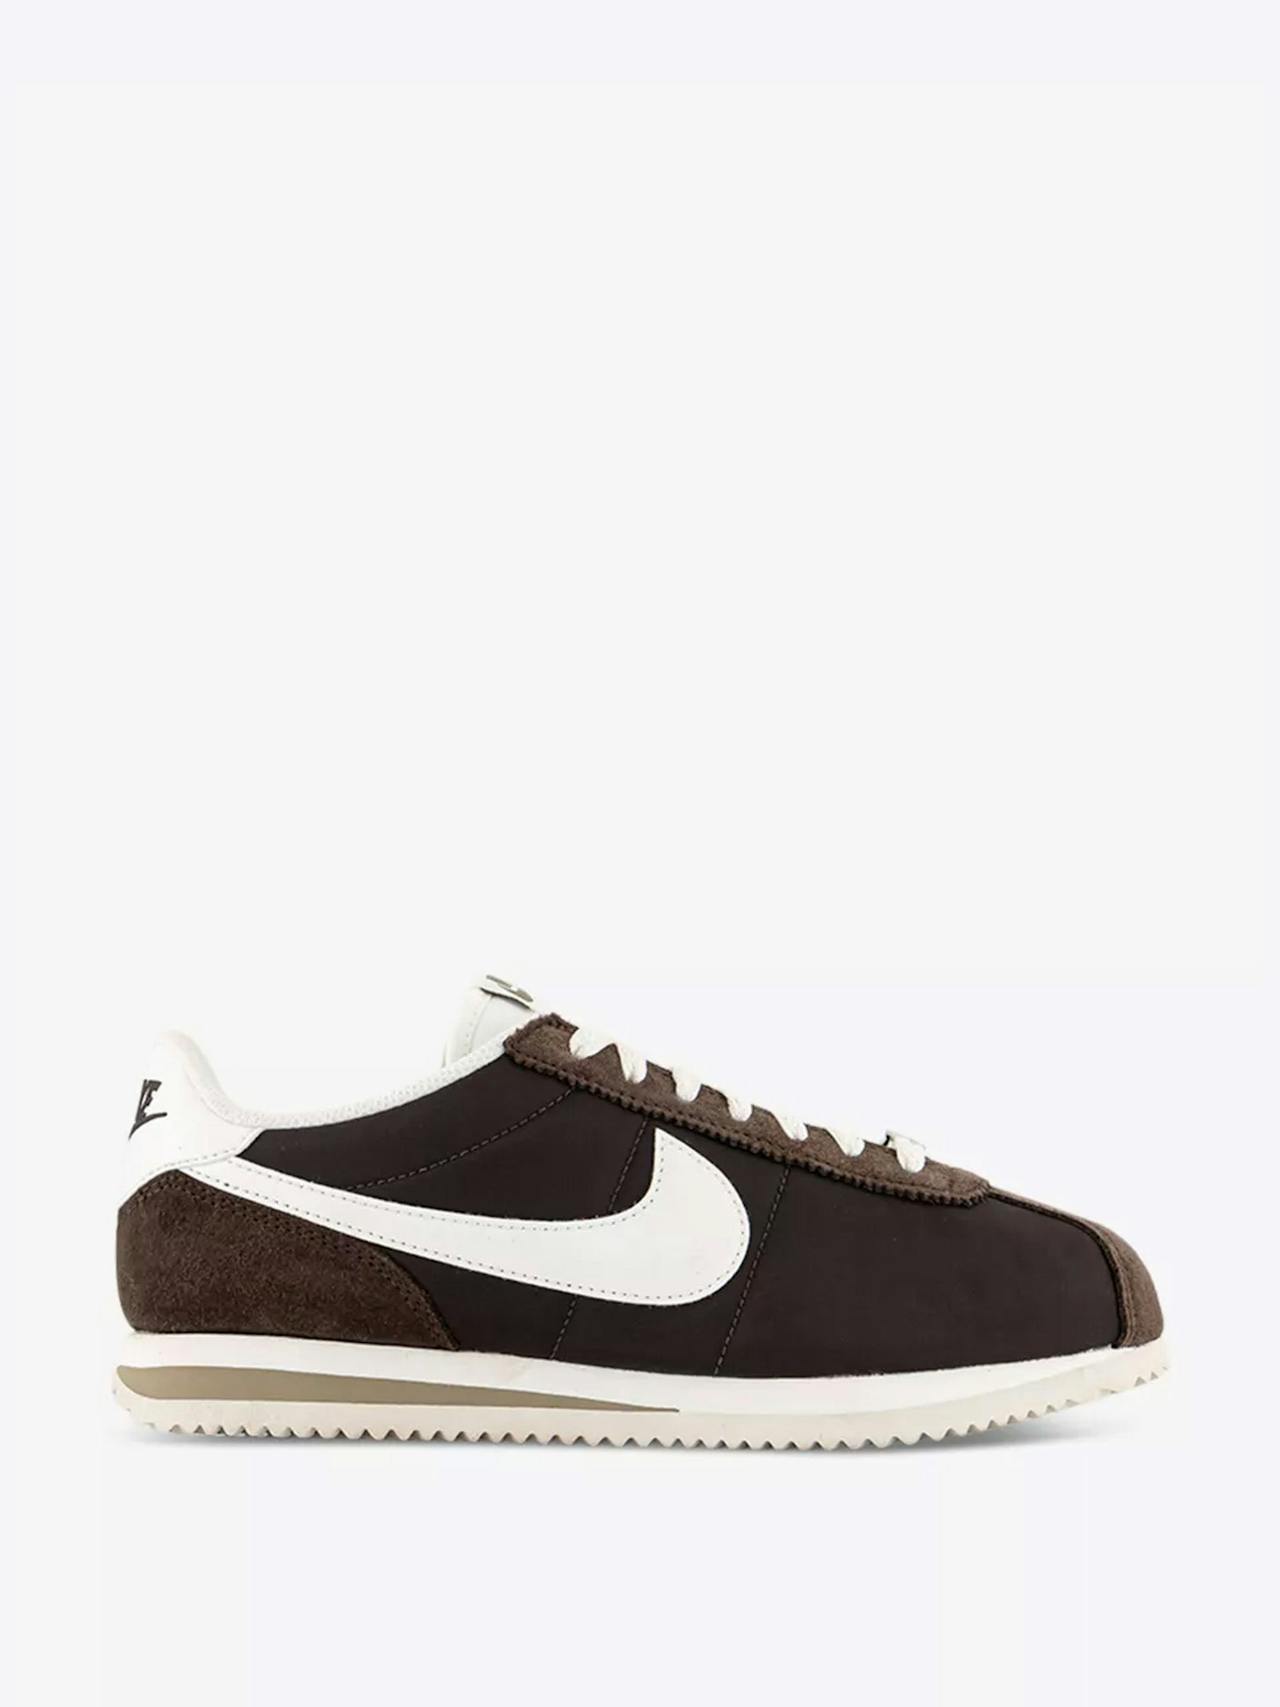 Cortez brand-embellished leather low-top trainers